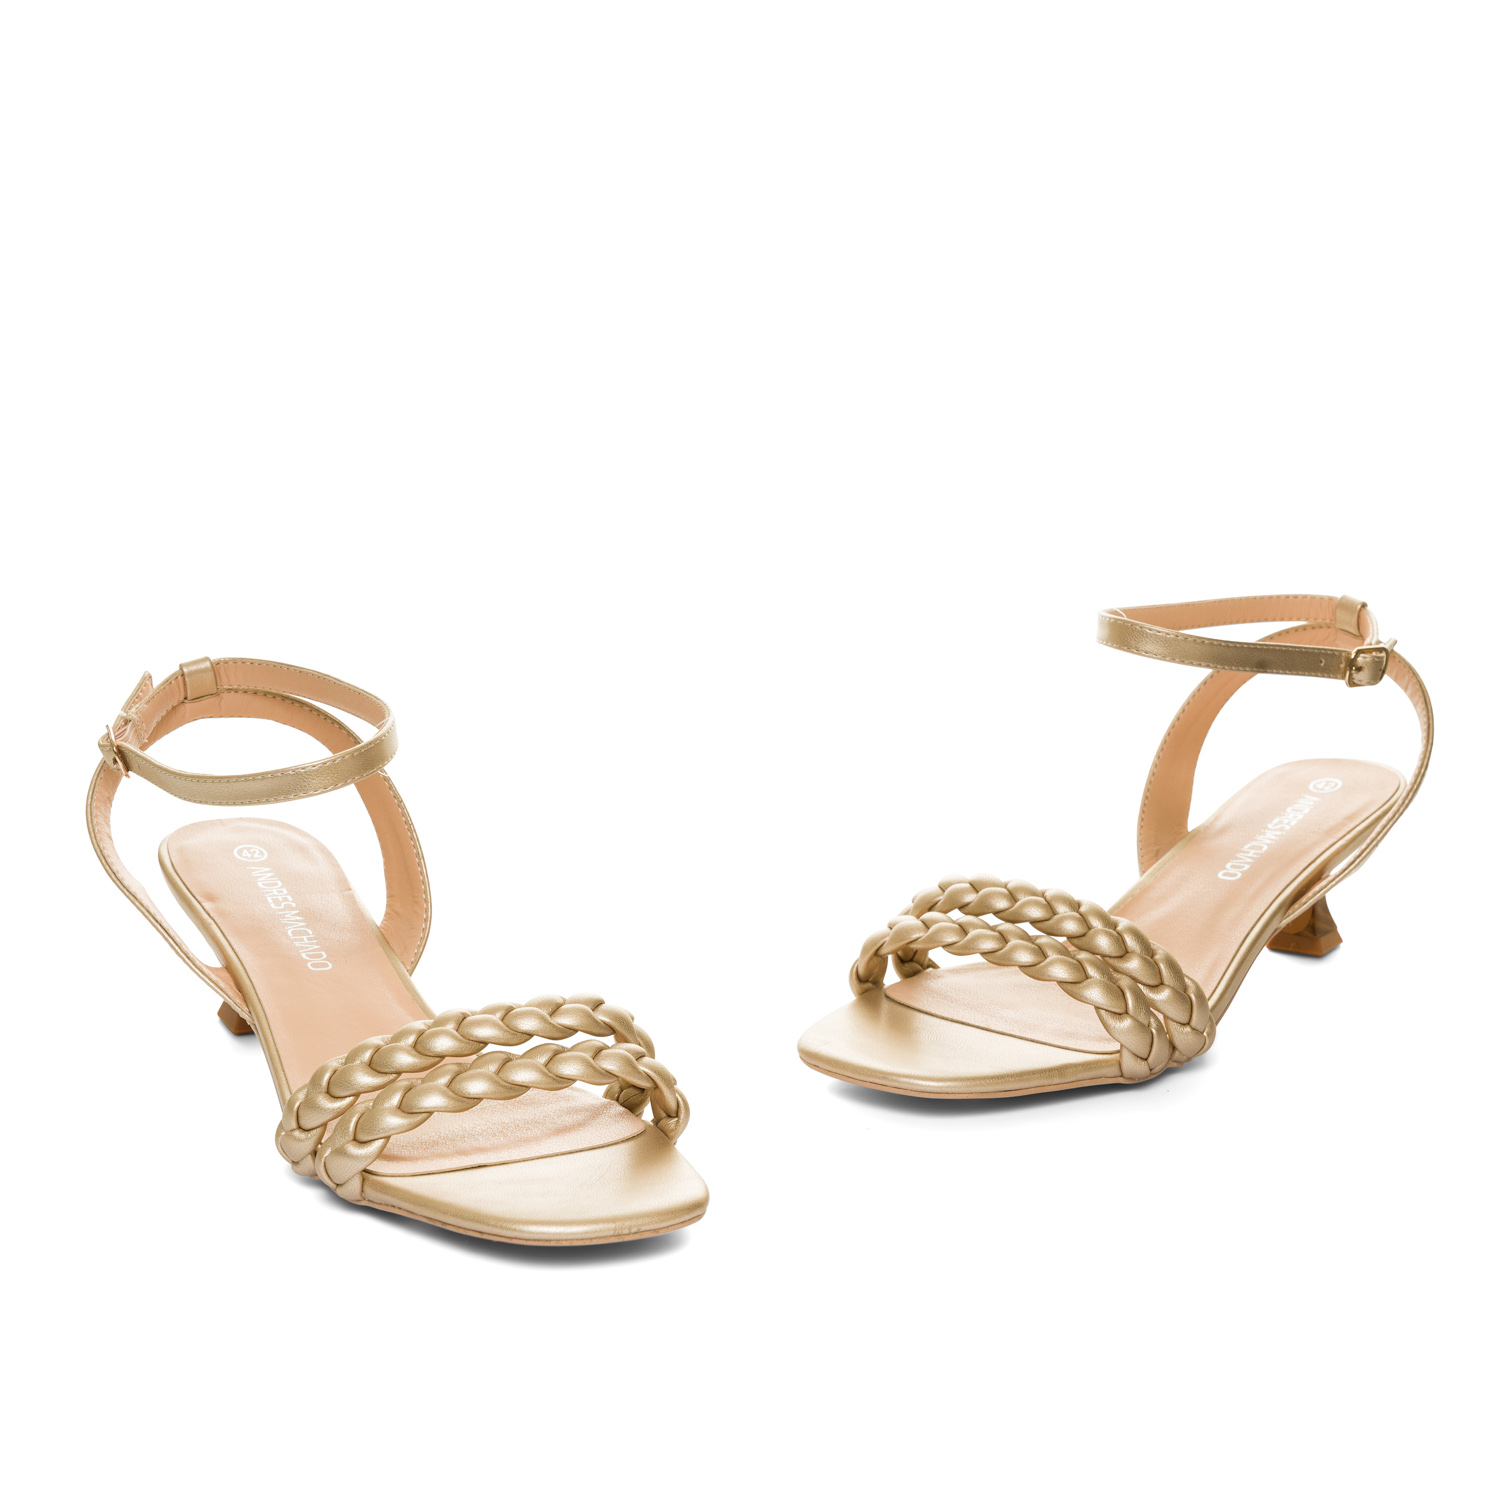 Gold faux leather sandals 